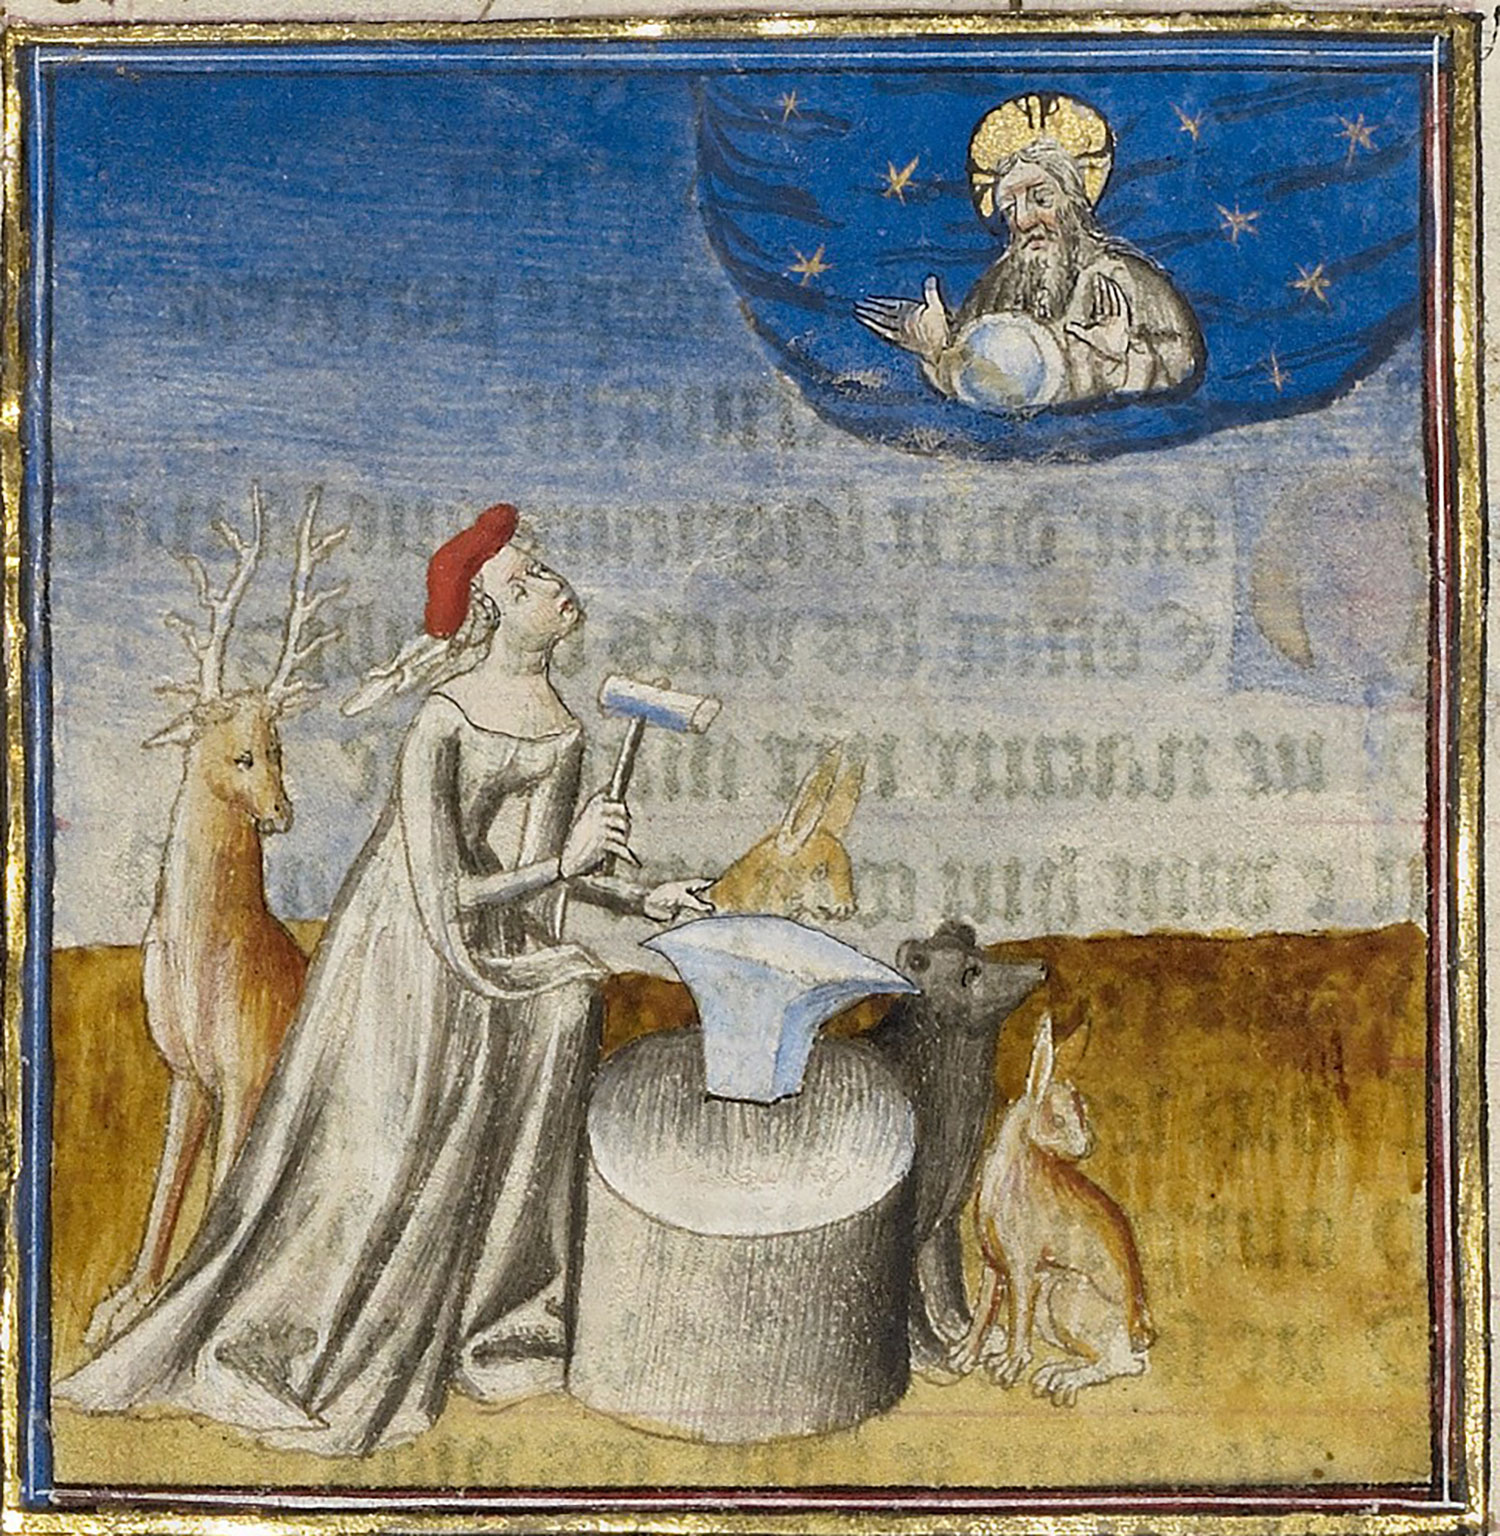 Nature personified in 15th-century dress looks up  from her work hammering out a rabbit on anvil at a be-turbaned divinity hovering in a blue void; her expression mingles confusion, incredulity, and yet a complete lack of surprise